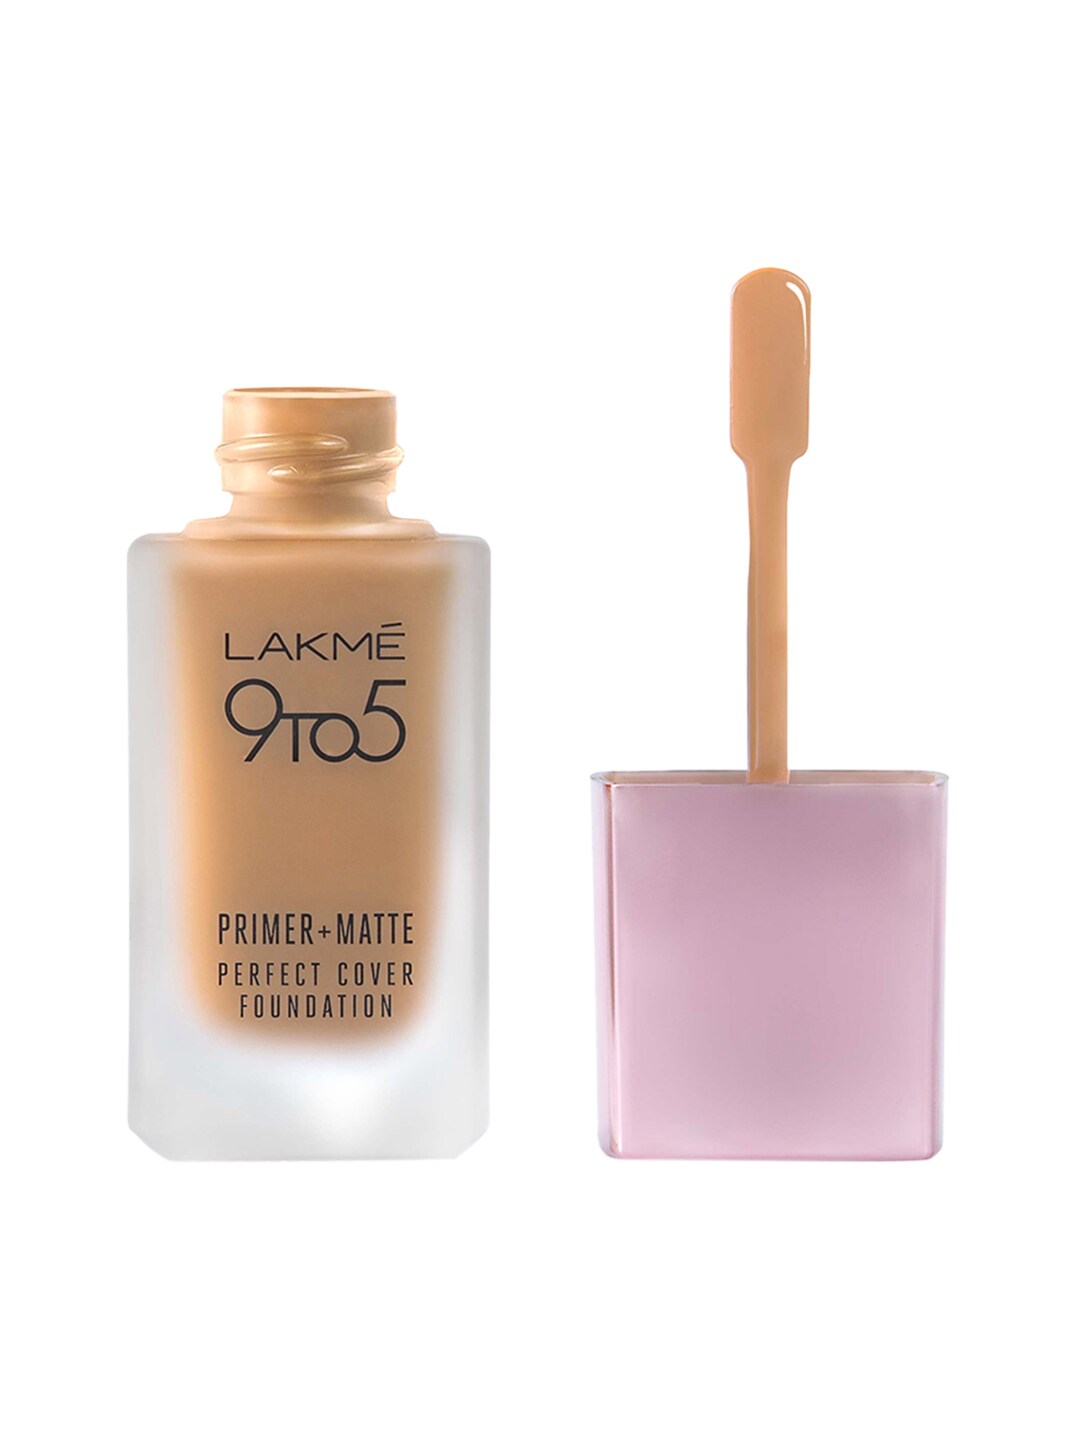 Lakme 9To5 Primer + Matte Perfect Cover Foundation - Warm Beige W240 25 ml Price in India